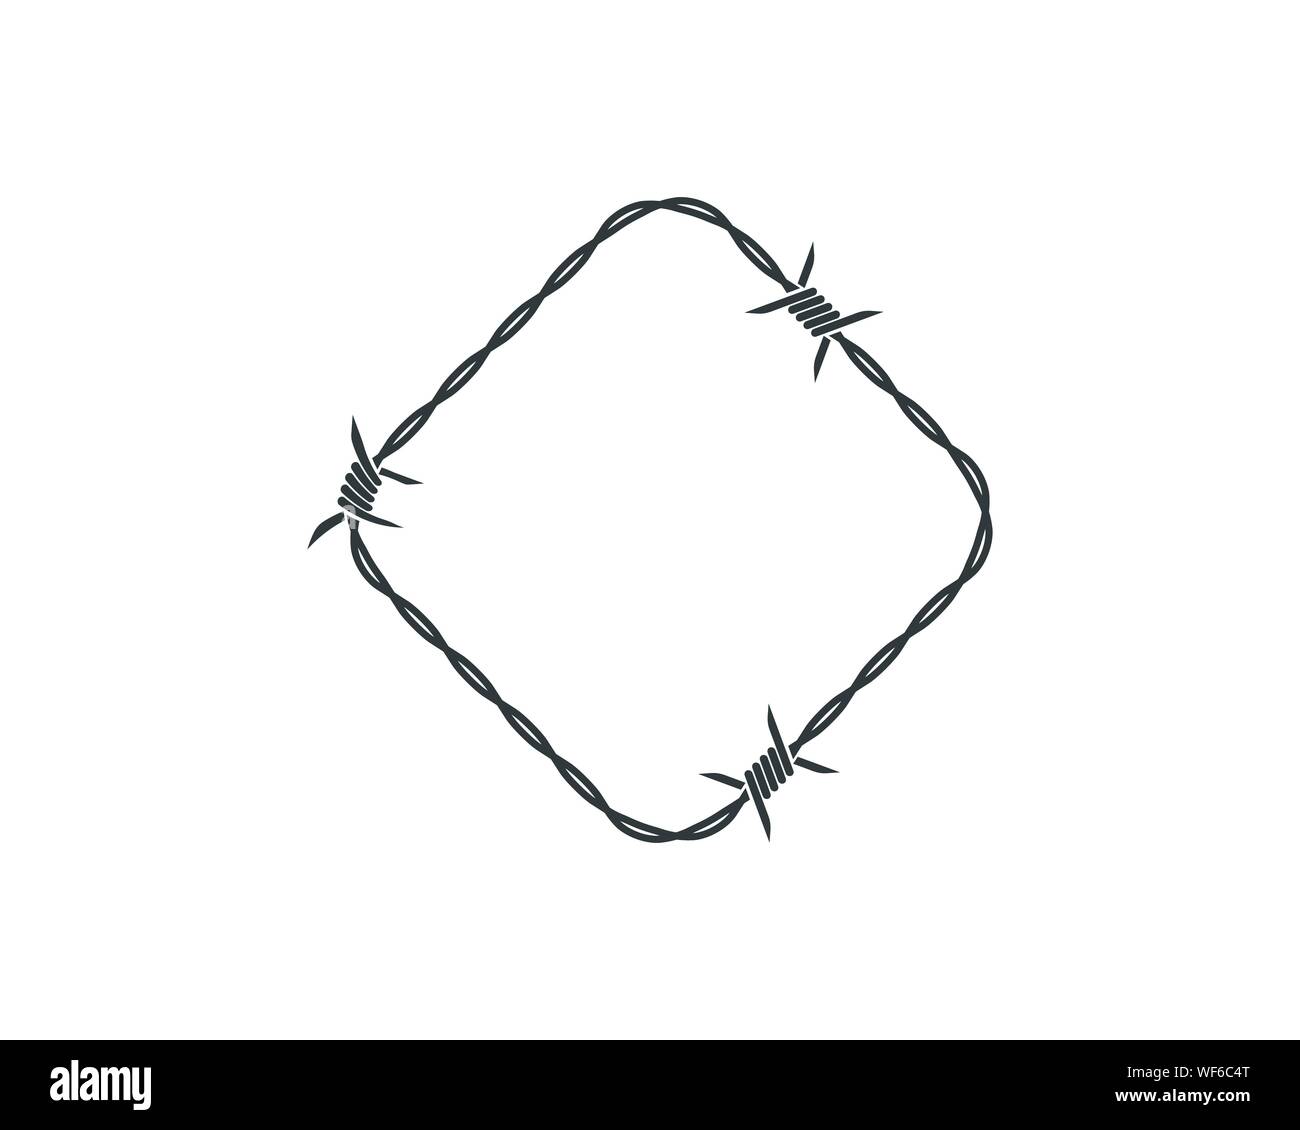 barbed wire vector illustration design Stock Vector